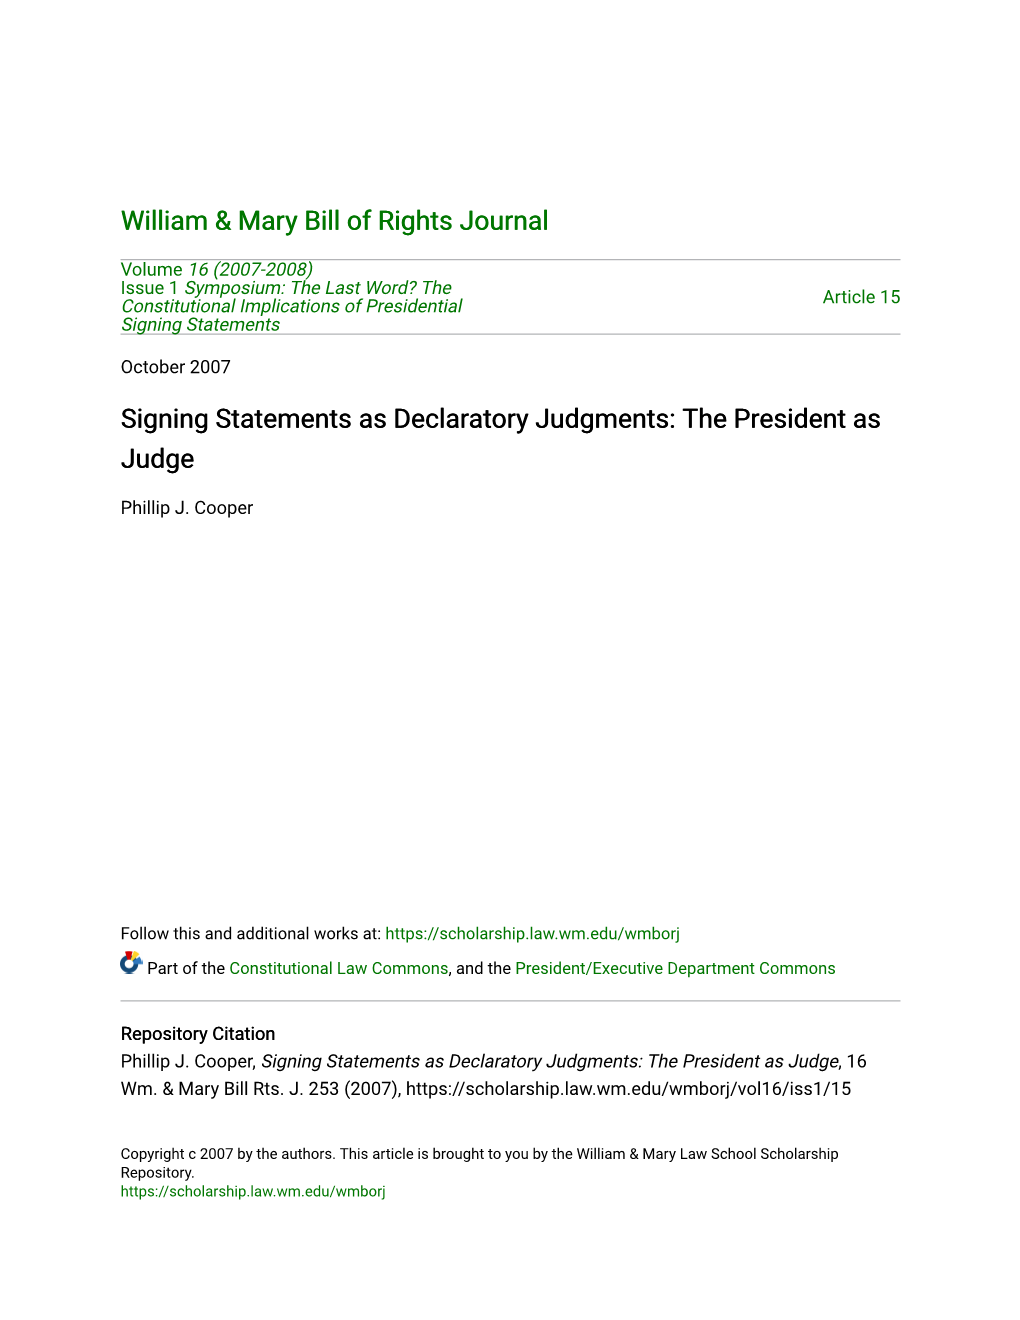 Signing Statements As Declaratory Judgments: the President As Judge